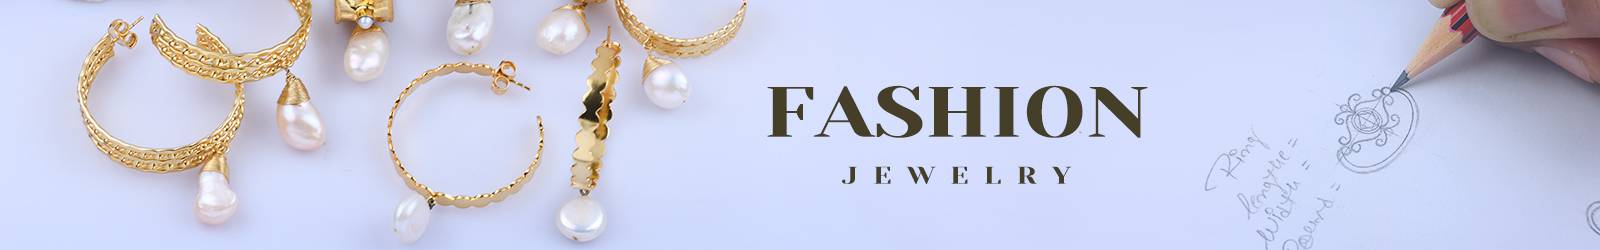 Fashion jewelry maker from India